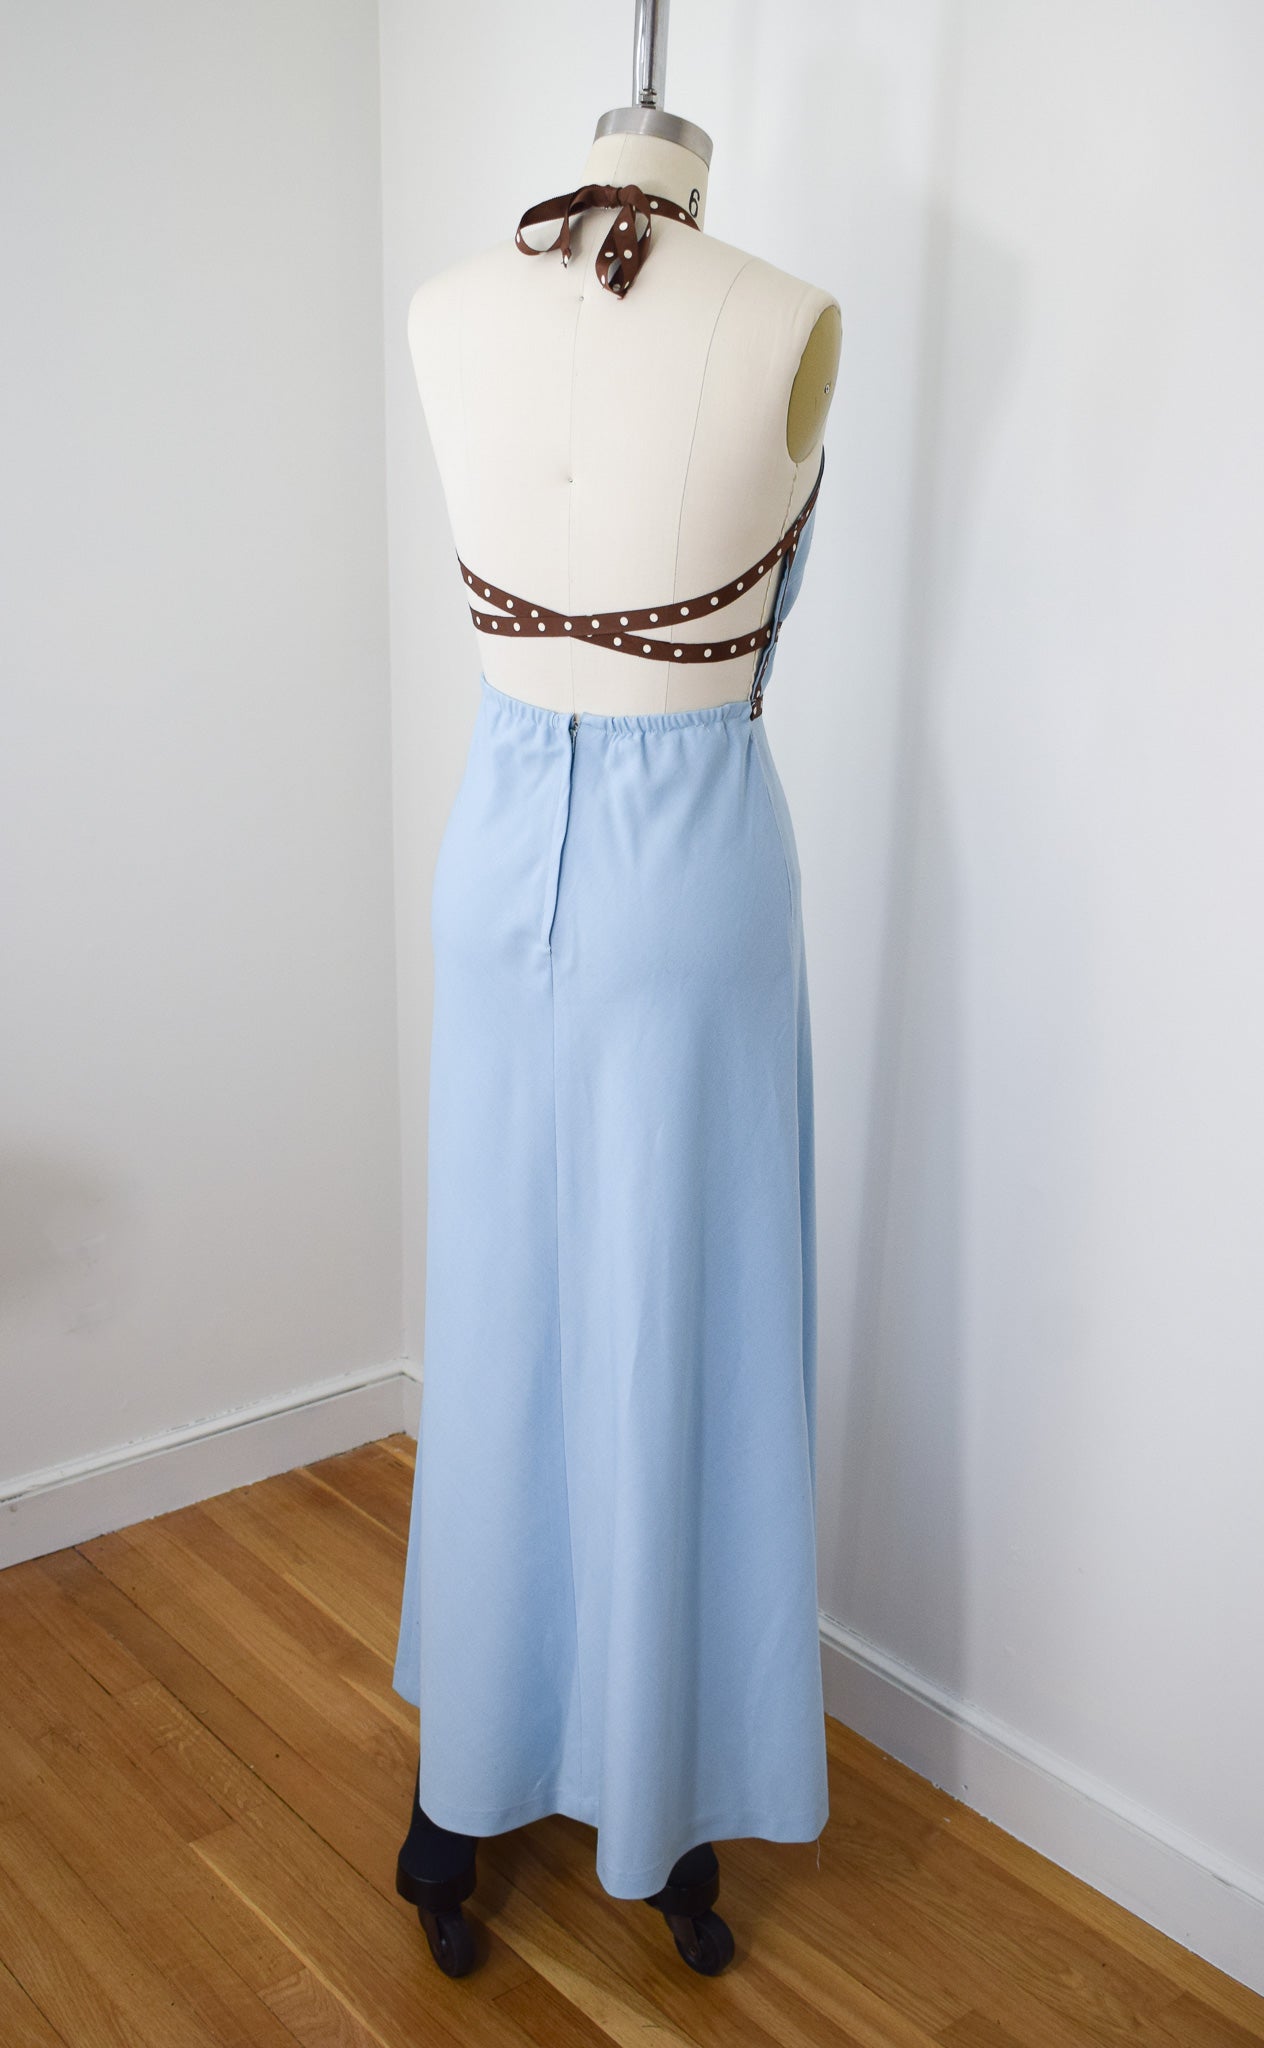 Vintage Backless Maxi Dress by NR1 | S